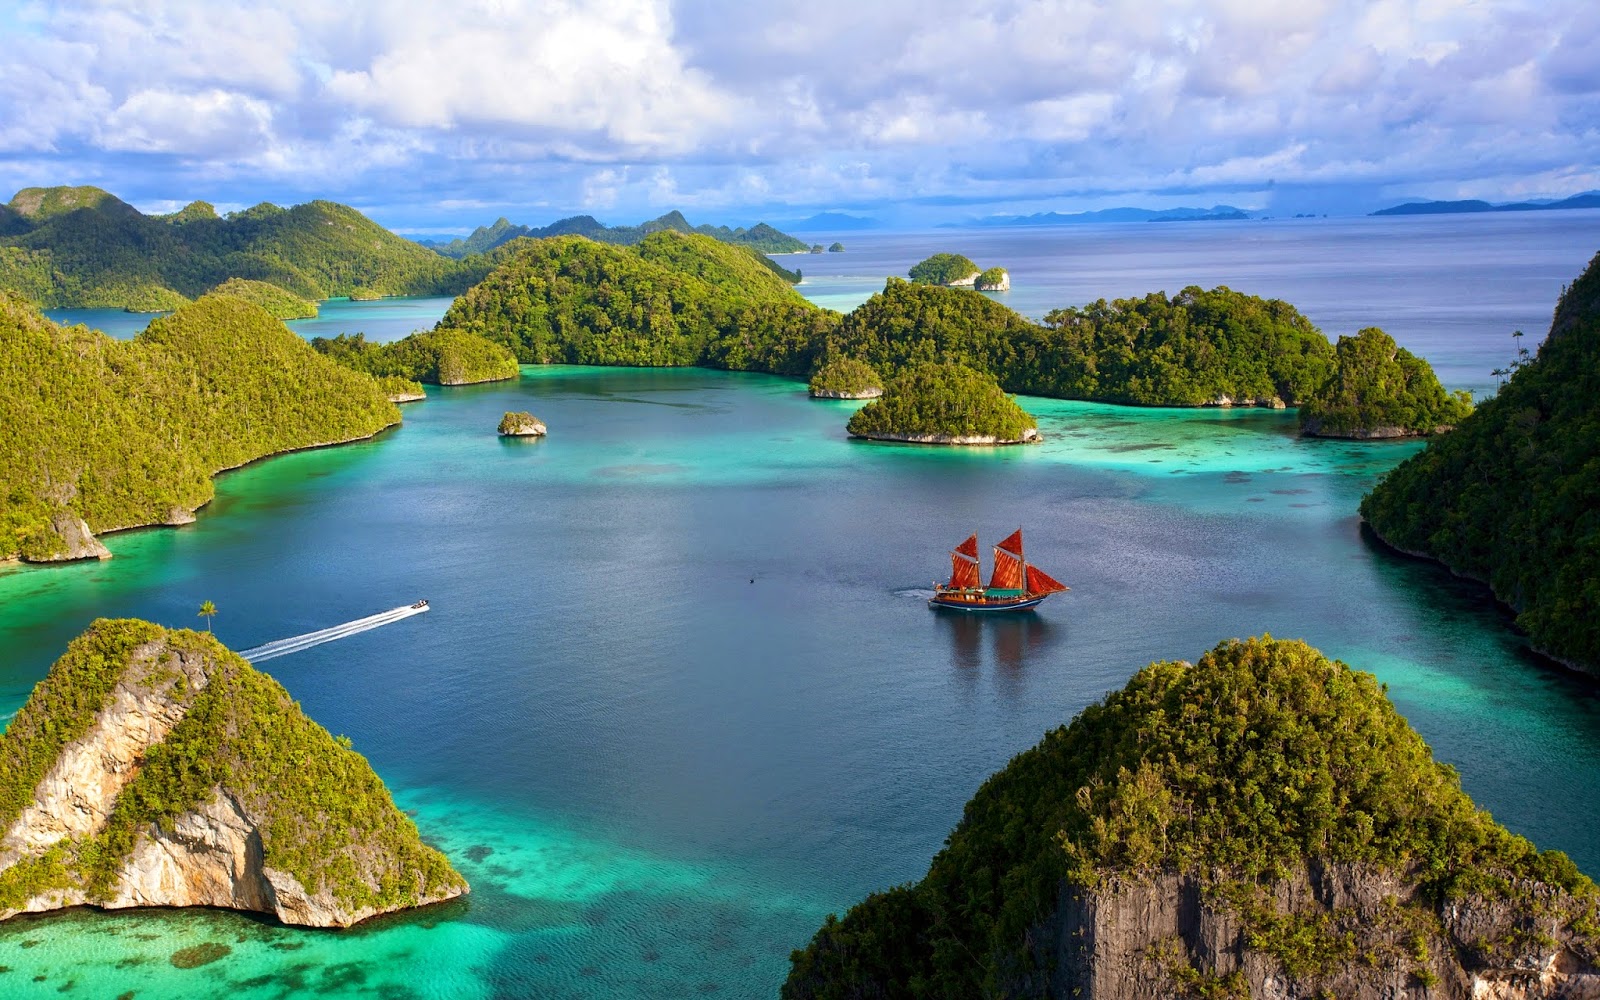 Indonesia Beautiful: Indonesia ranked 4th Most Beautiful Country in the